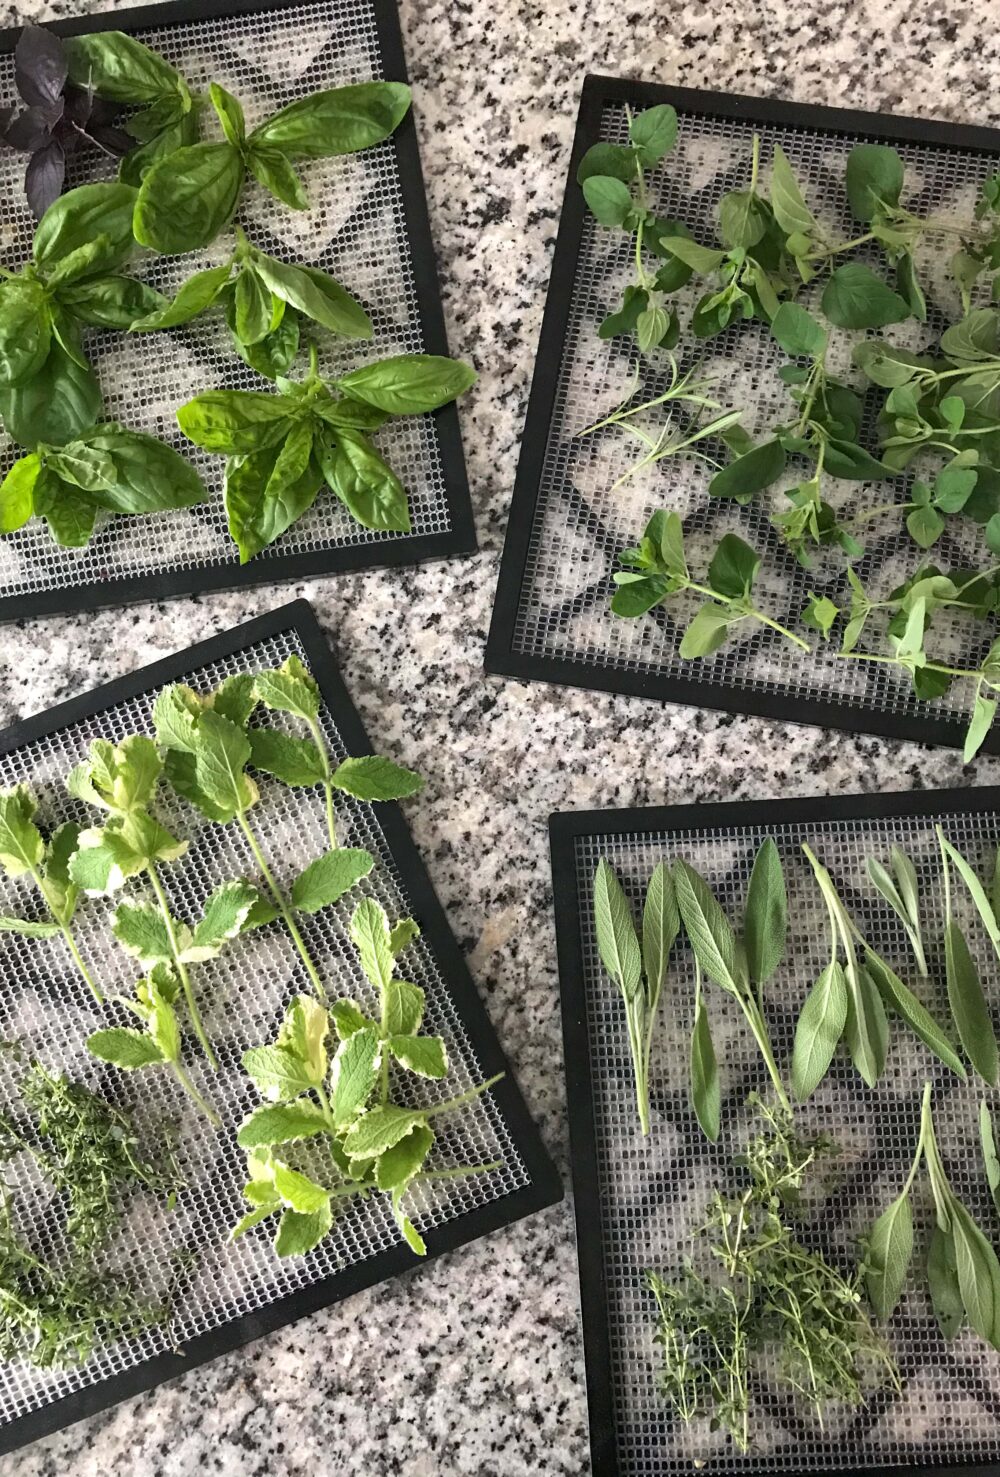 Dehydrator trays full of thyme, sage, mint, oregano and basil on a granite countertop; how to preserve fresh herbs